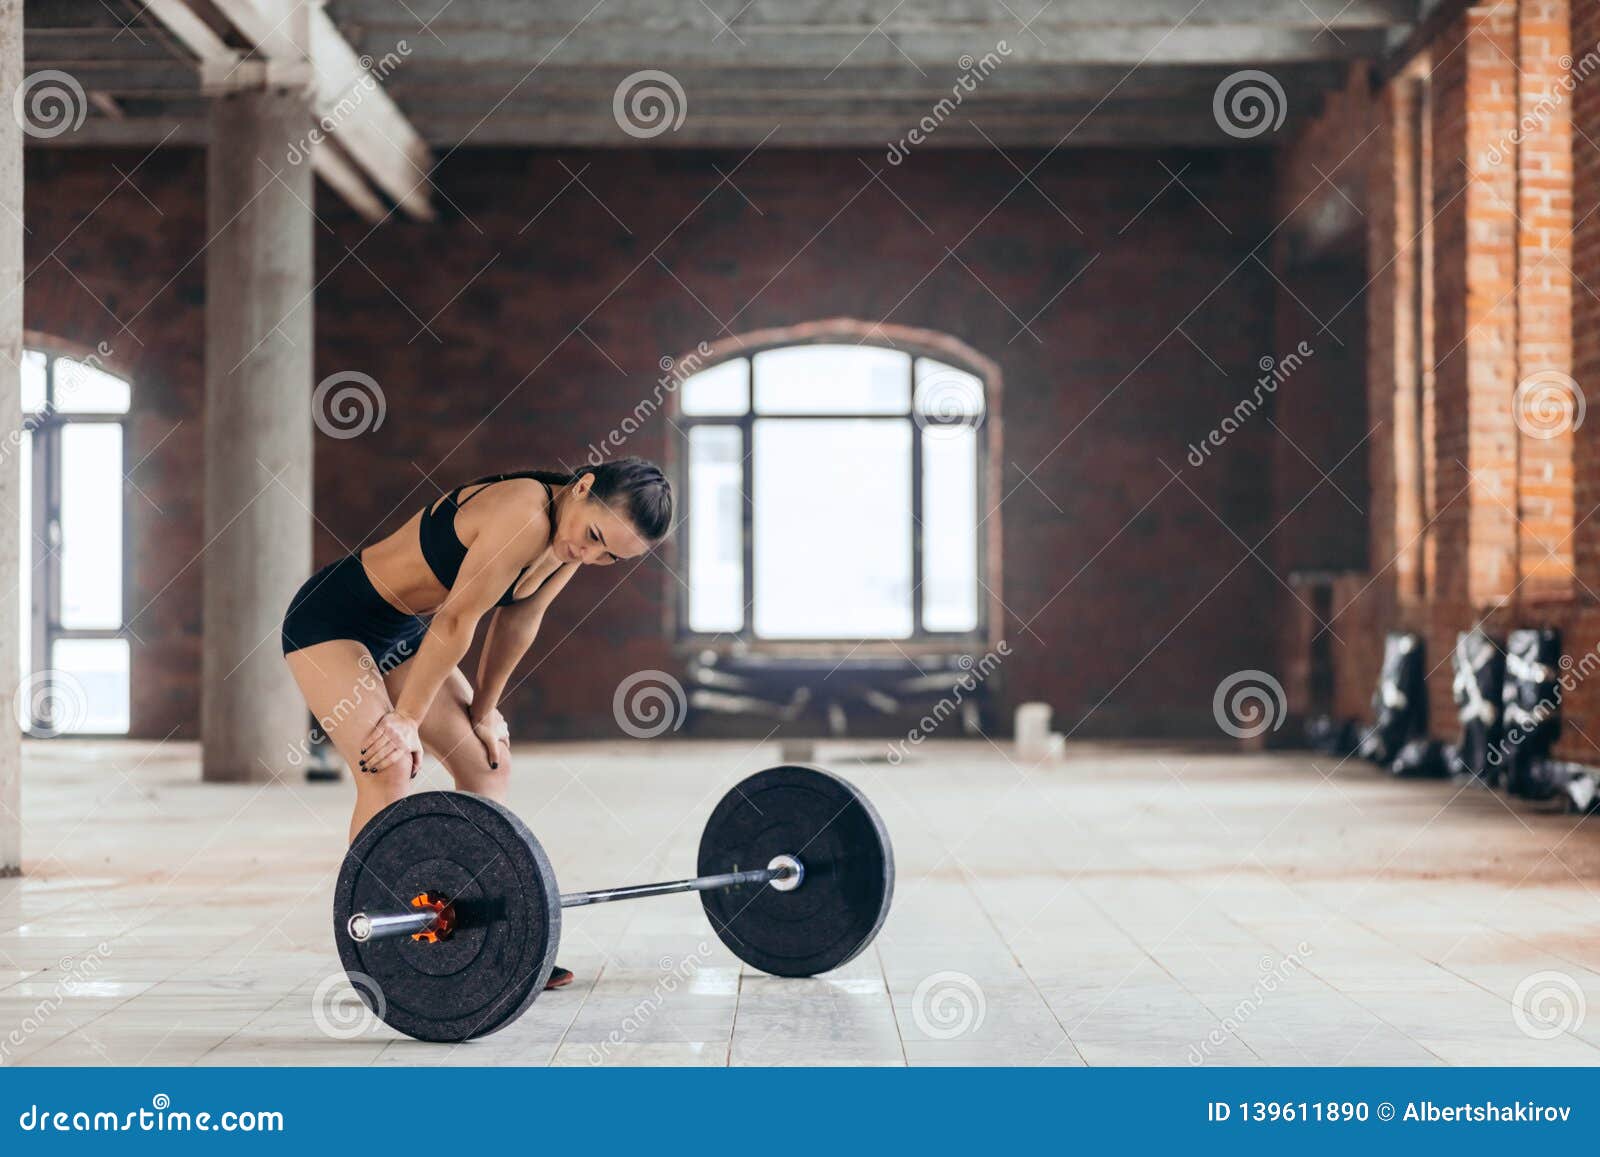 Slim Woman Having a Rest after Workout at Gym Stock Photo - Image of ...